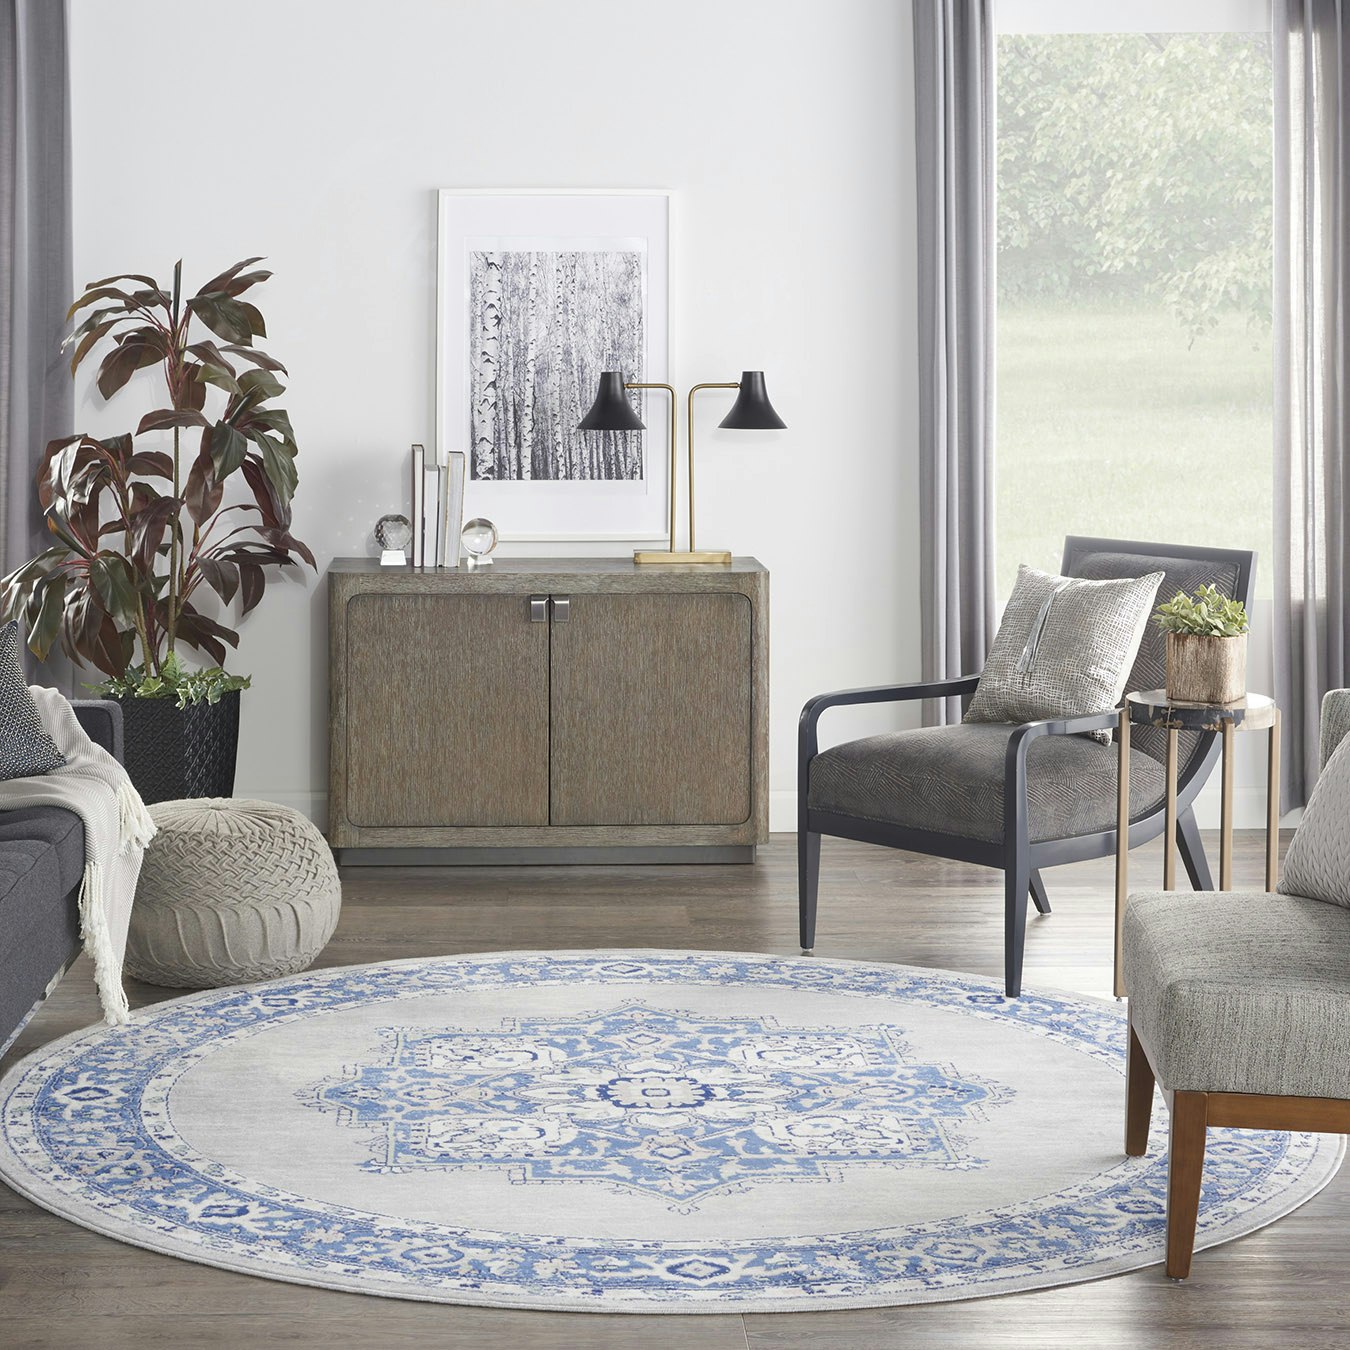 Whimsicle Round Rug Blue / Grey by Nourison Fy